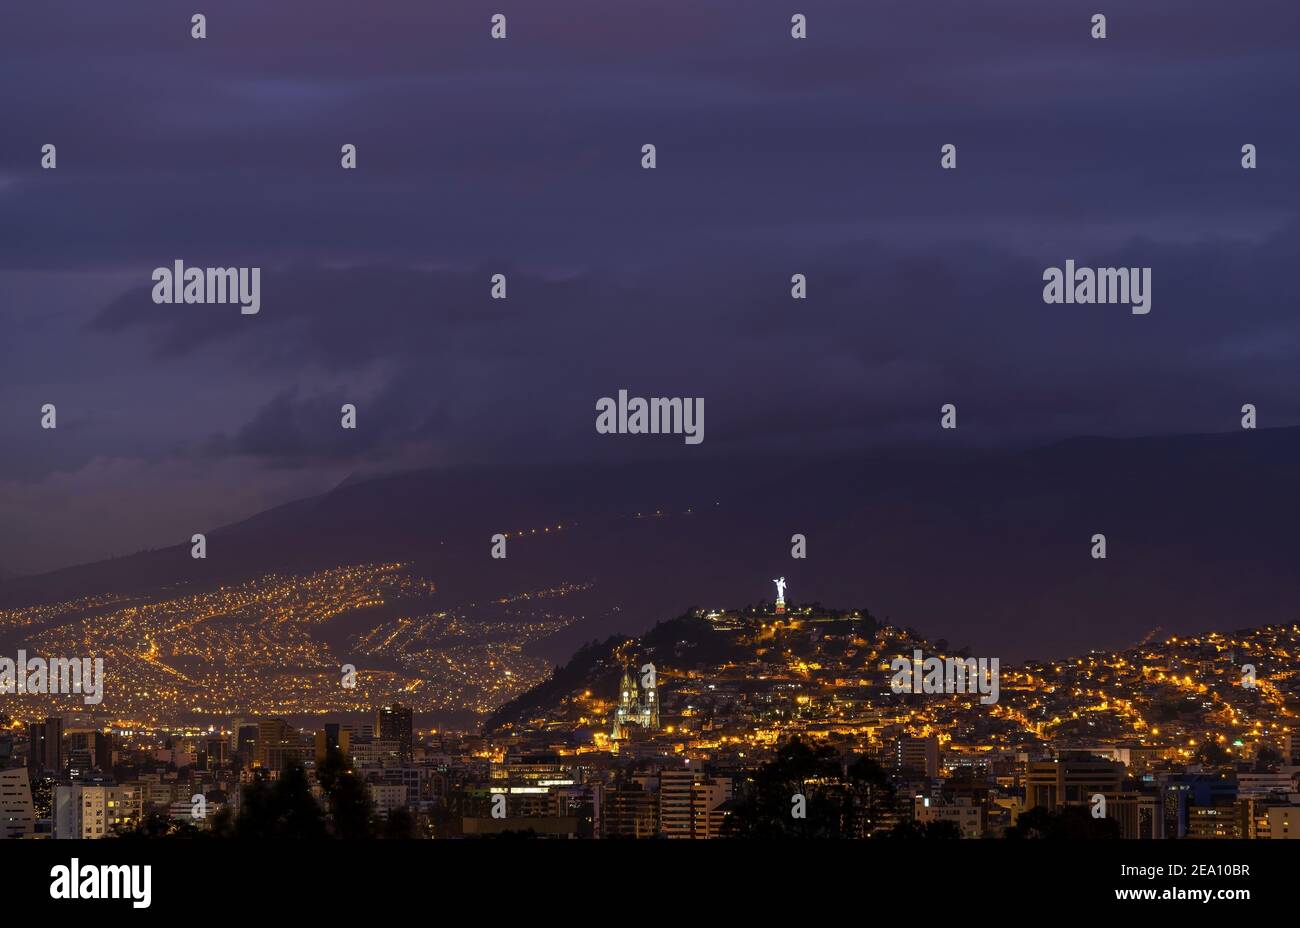 Night skyline of Quito with the Panecillo Hill and Apocalyptic Virgin Mary of Quito, Ecuador. Stock Photo